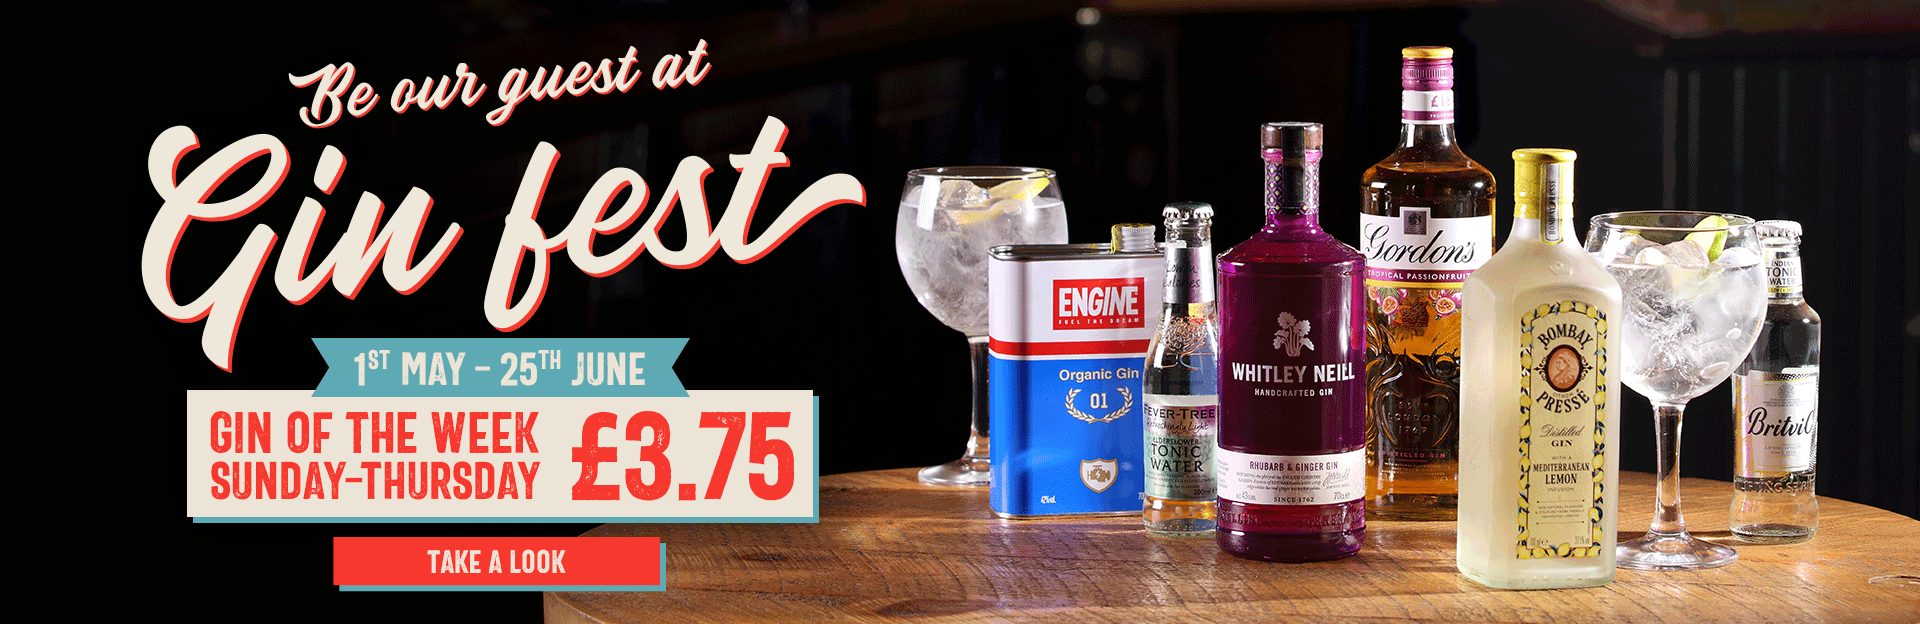 Gin Fest at The Plough